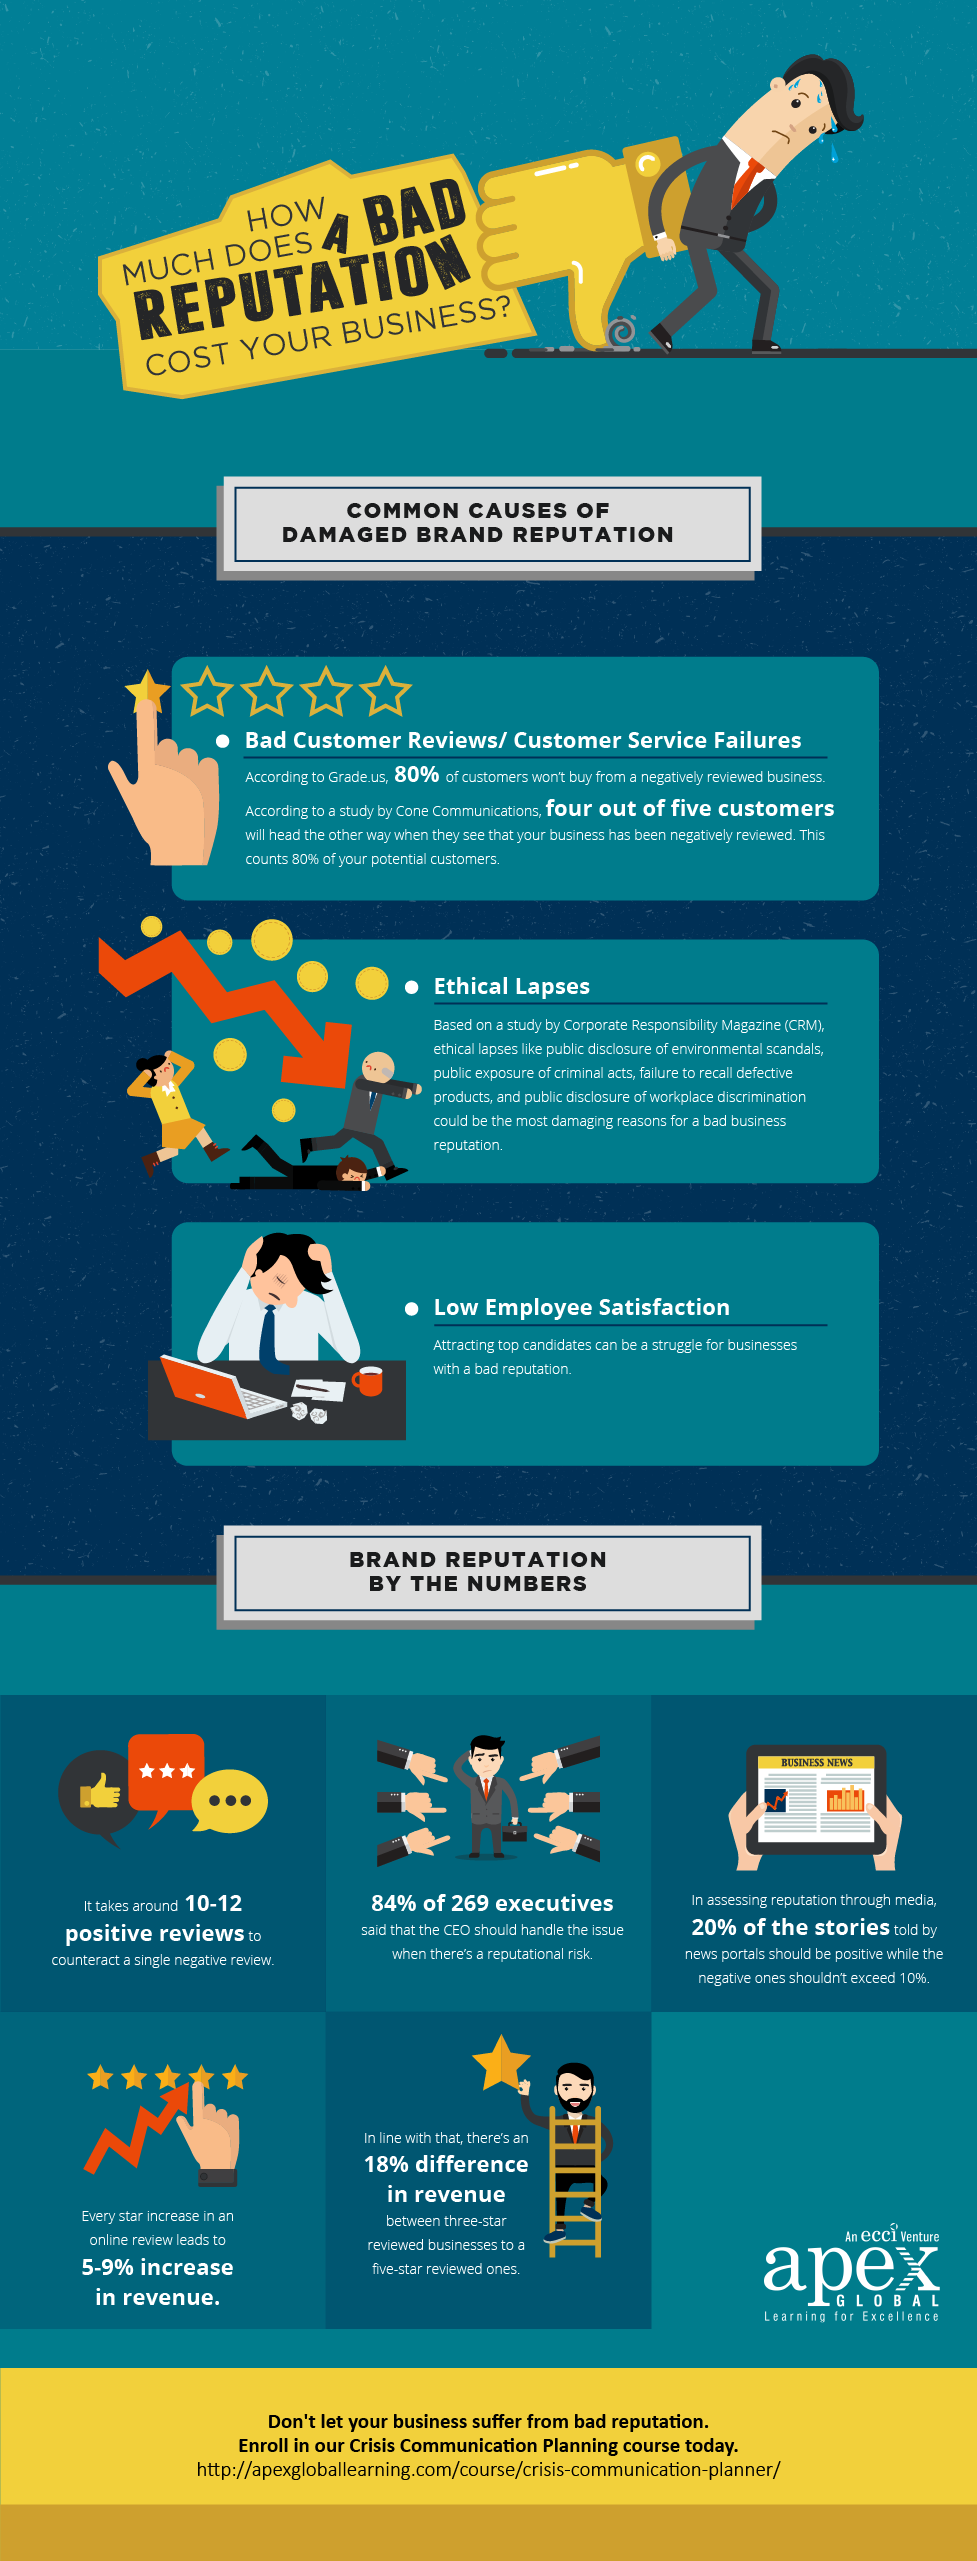 How-Much-Does-a-Bad-Reputation-Cost-Your-Business-infographic-plaza